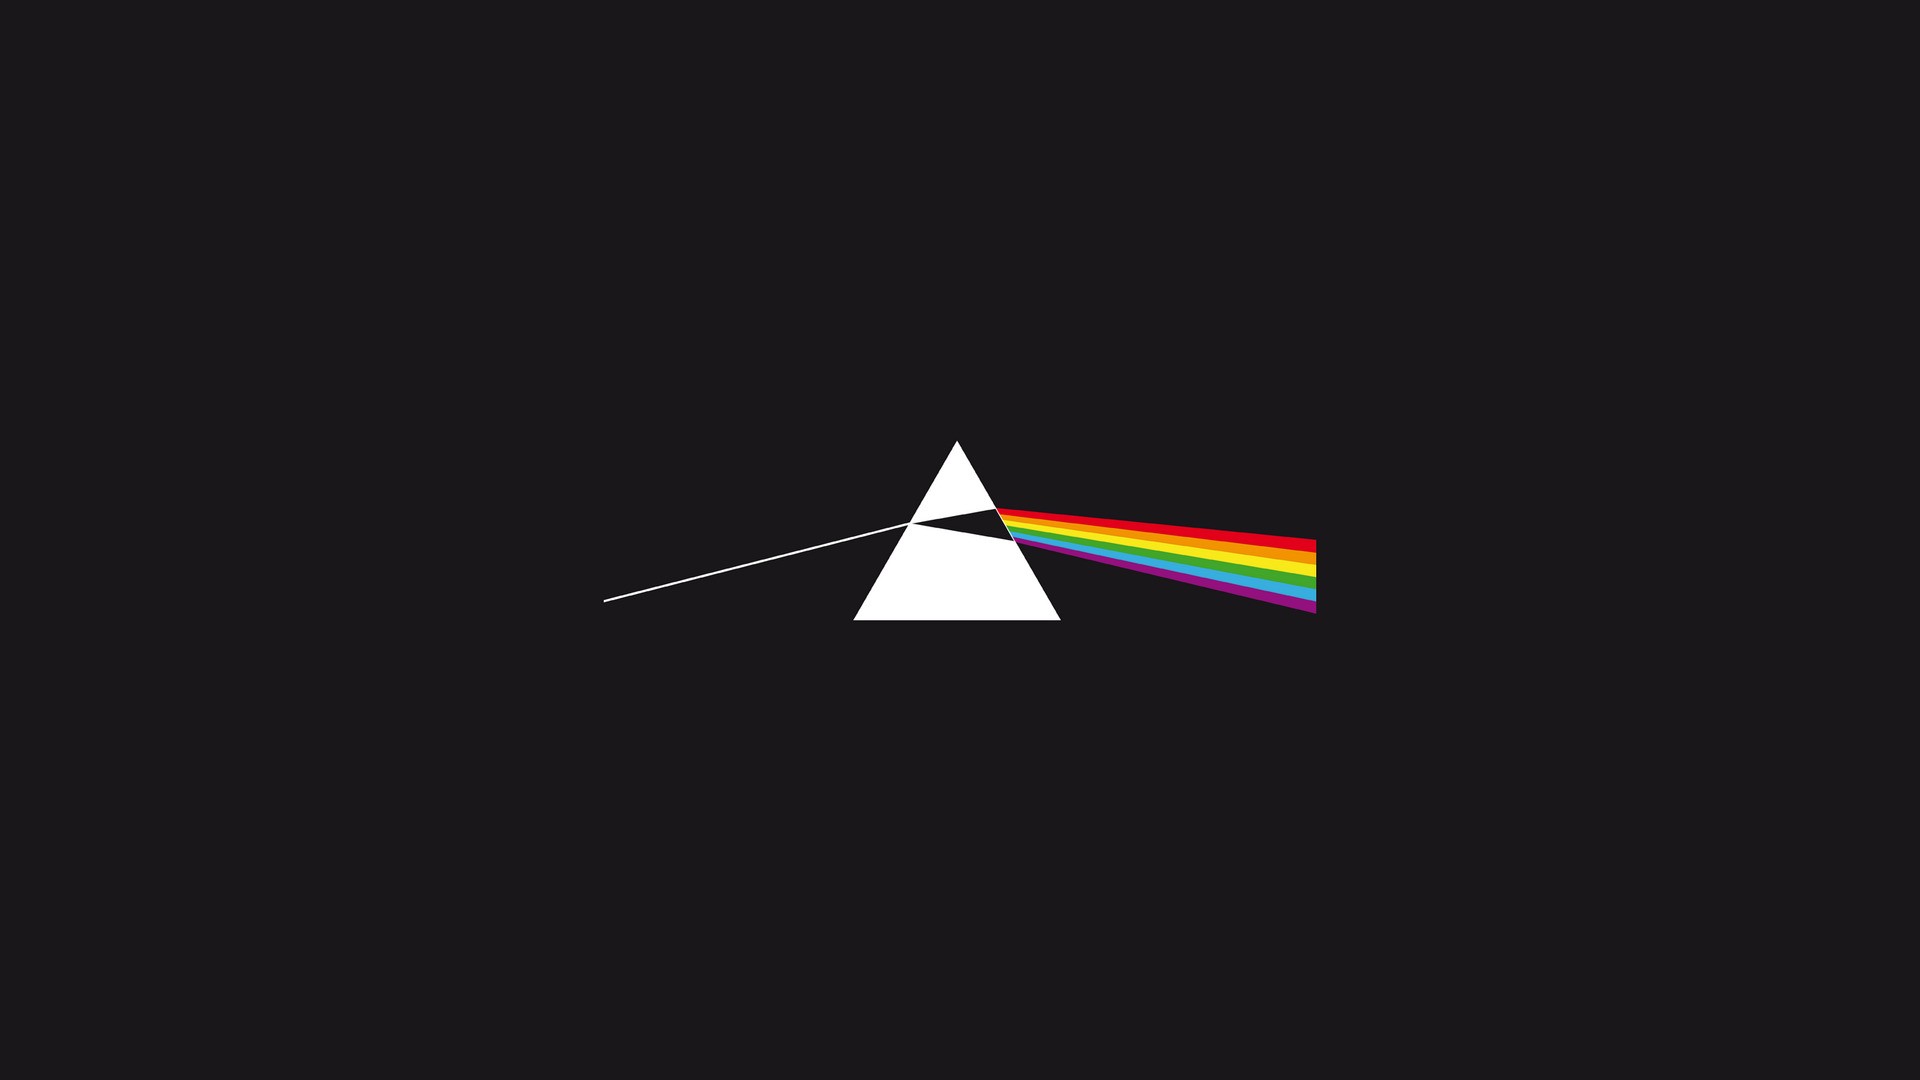 General 1920x1080 triangle The Dark Side of the Moon prism simple background black background geometric figures minimalism